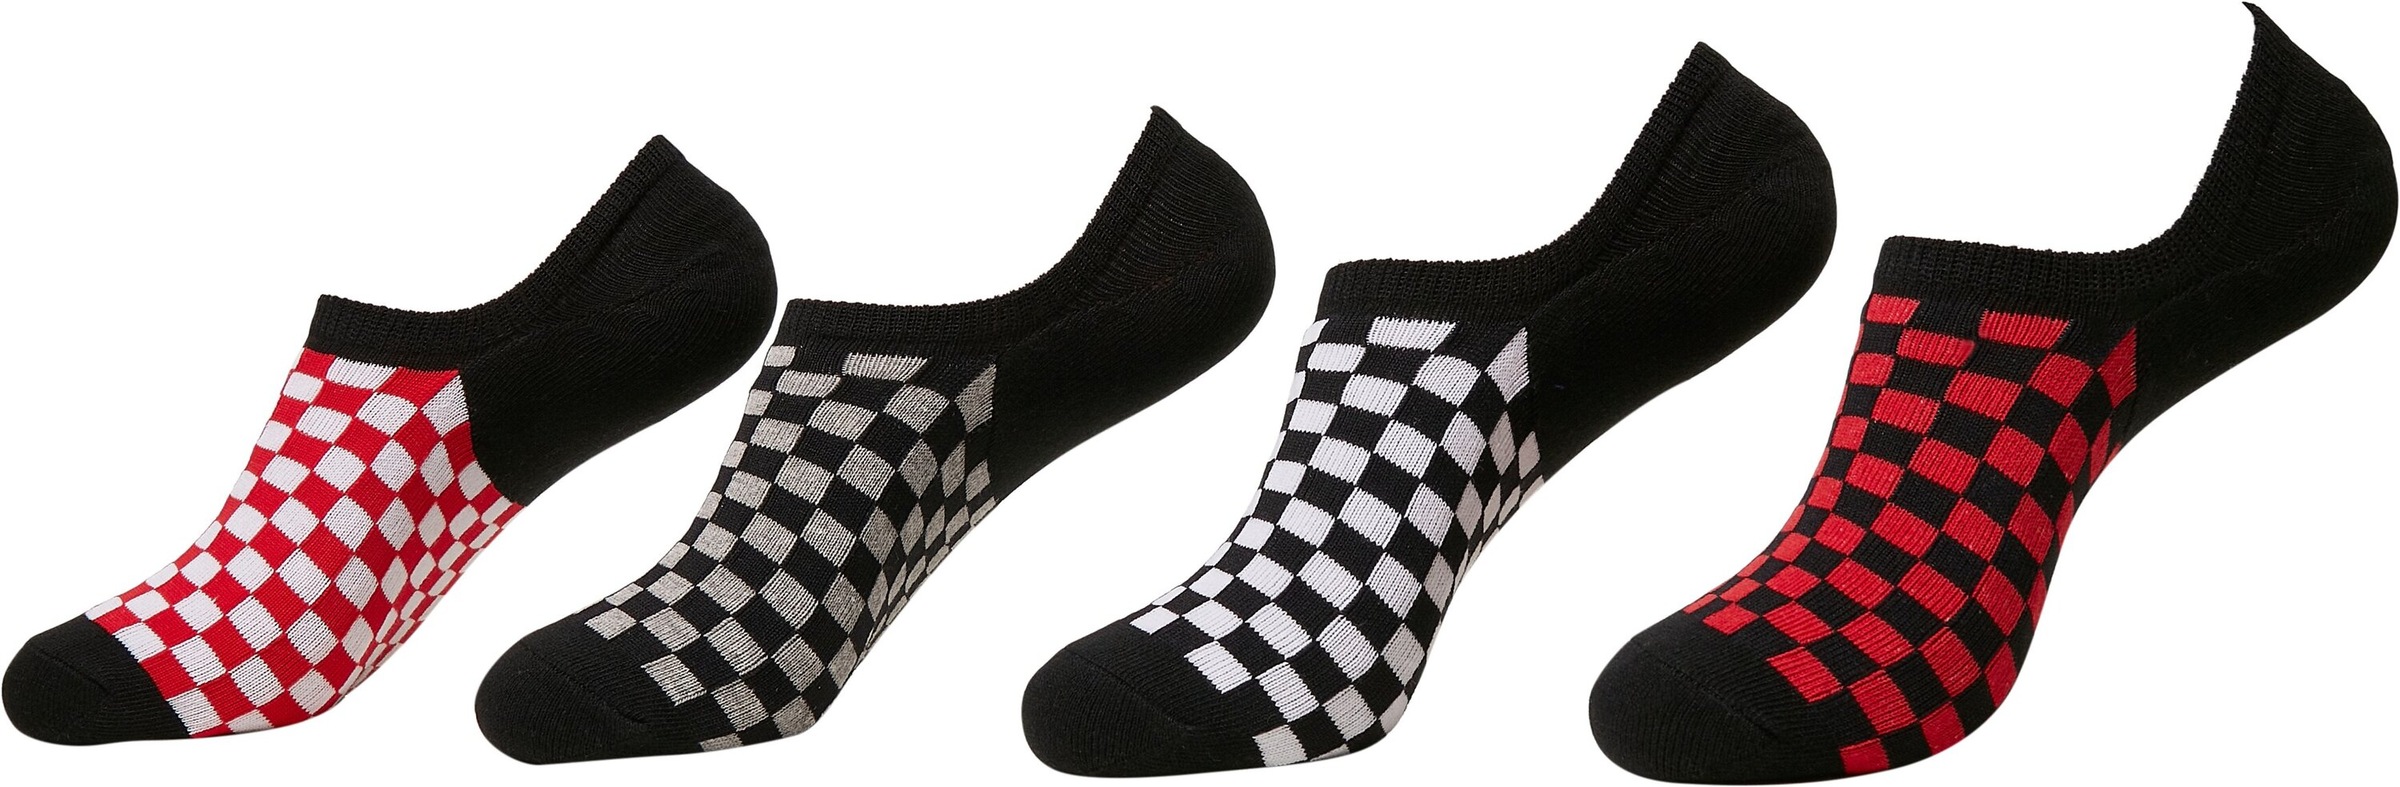 Invisible URBAN CLASSICS 4-Pack Accessoires Recycled Check Yarn Freizeitsocken (1 Socks Paar)